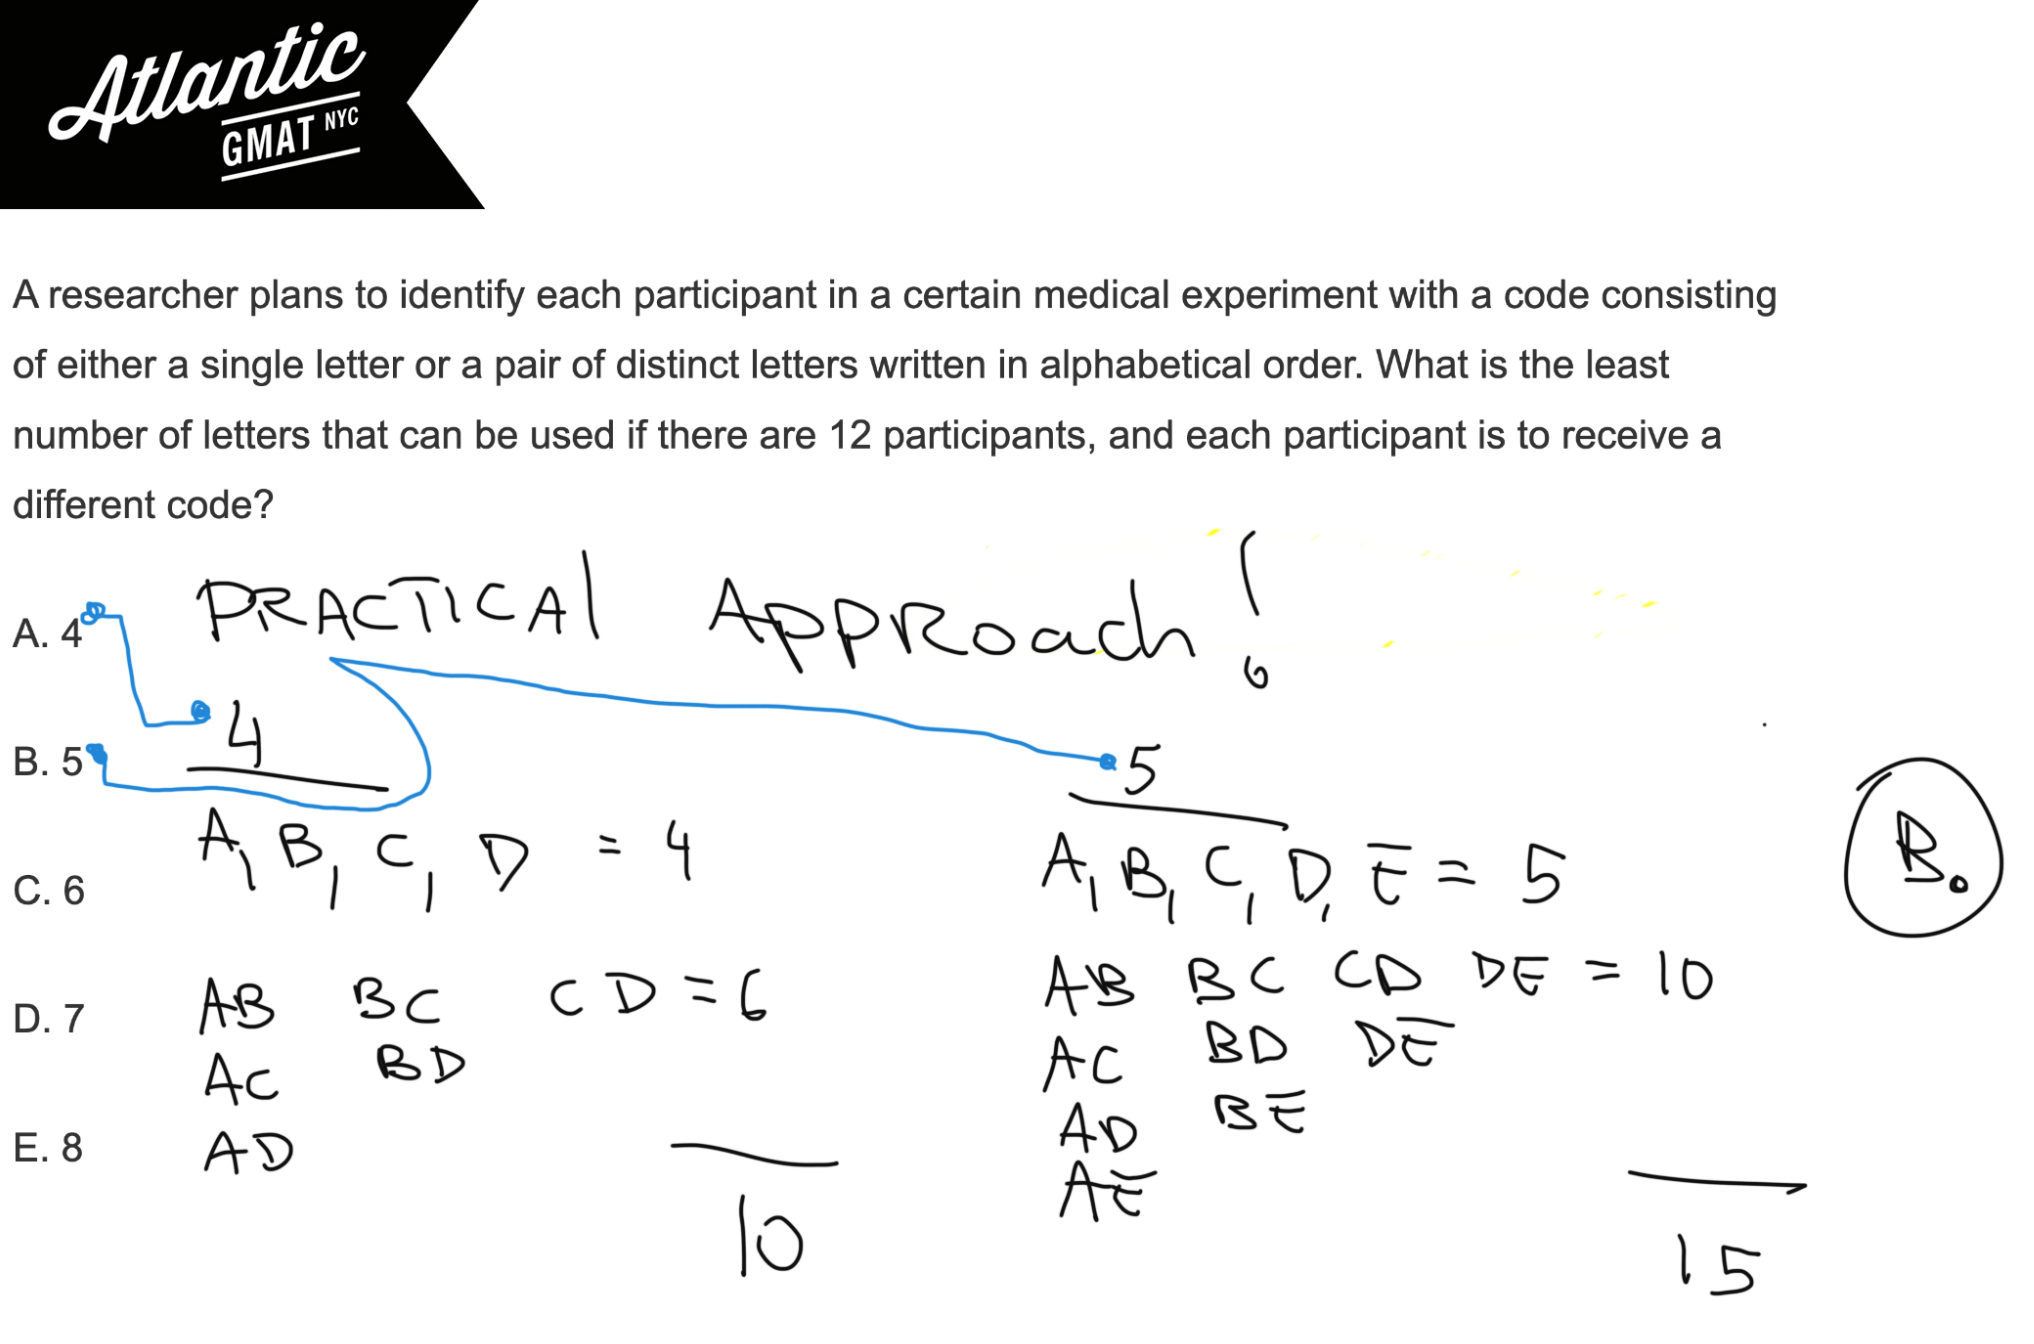 a researcher plans to identify each participant in a certain medical experiment gmat explanation 2 diagram